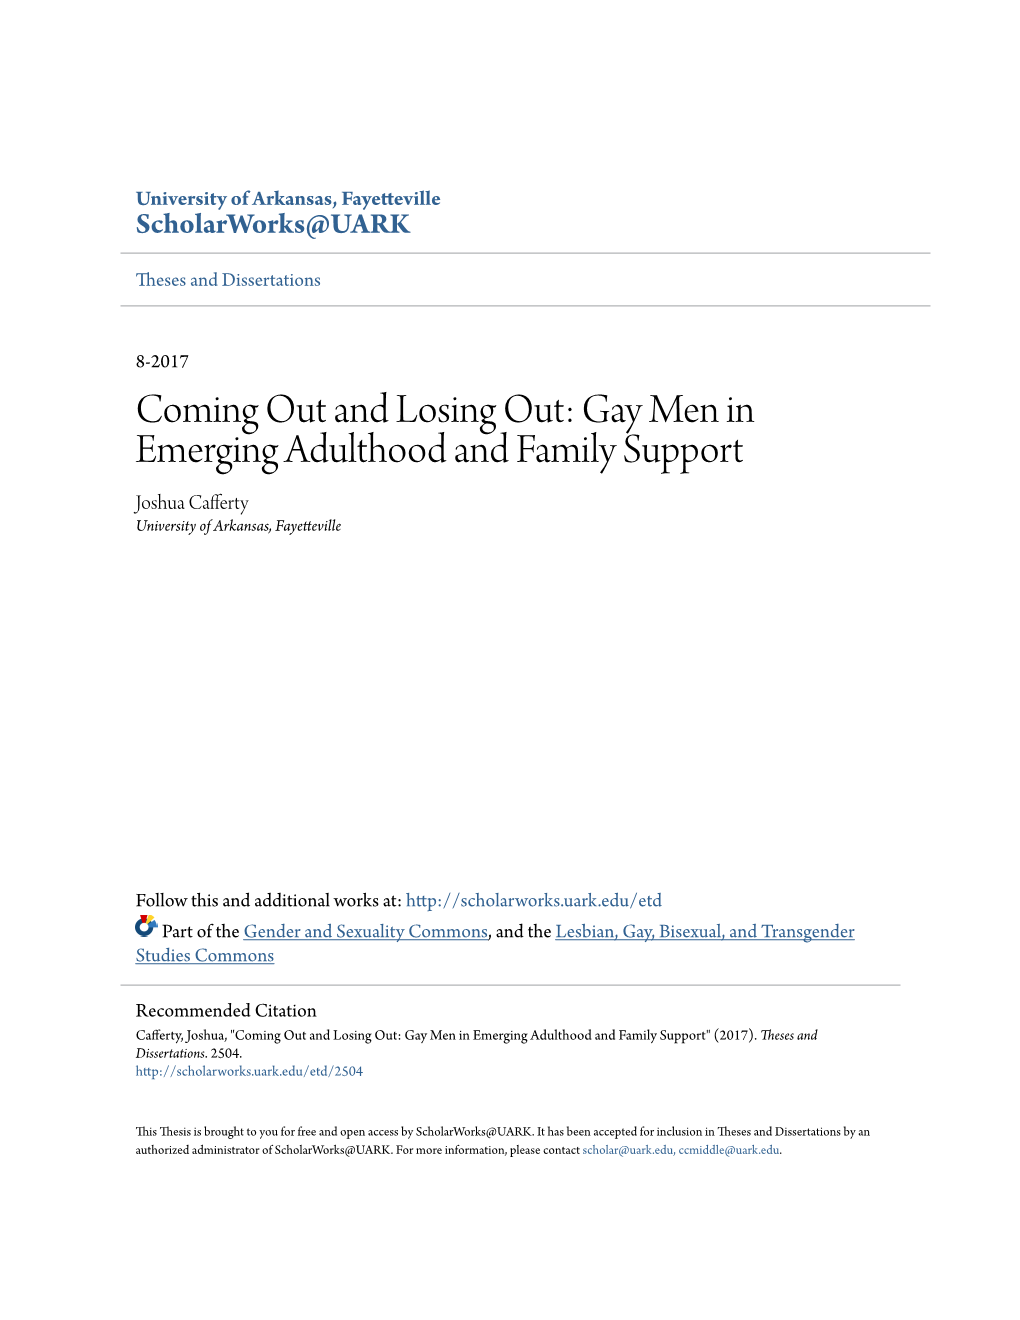 Coming out and Losing Out: Gay Men in Emerging Adulthood and Family Support Joshua Cafferty University of Arkansas, Fayetteville